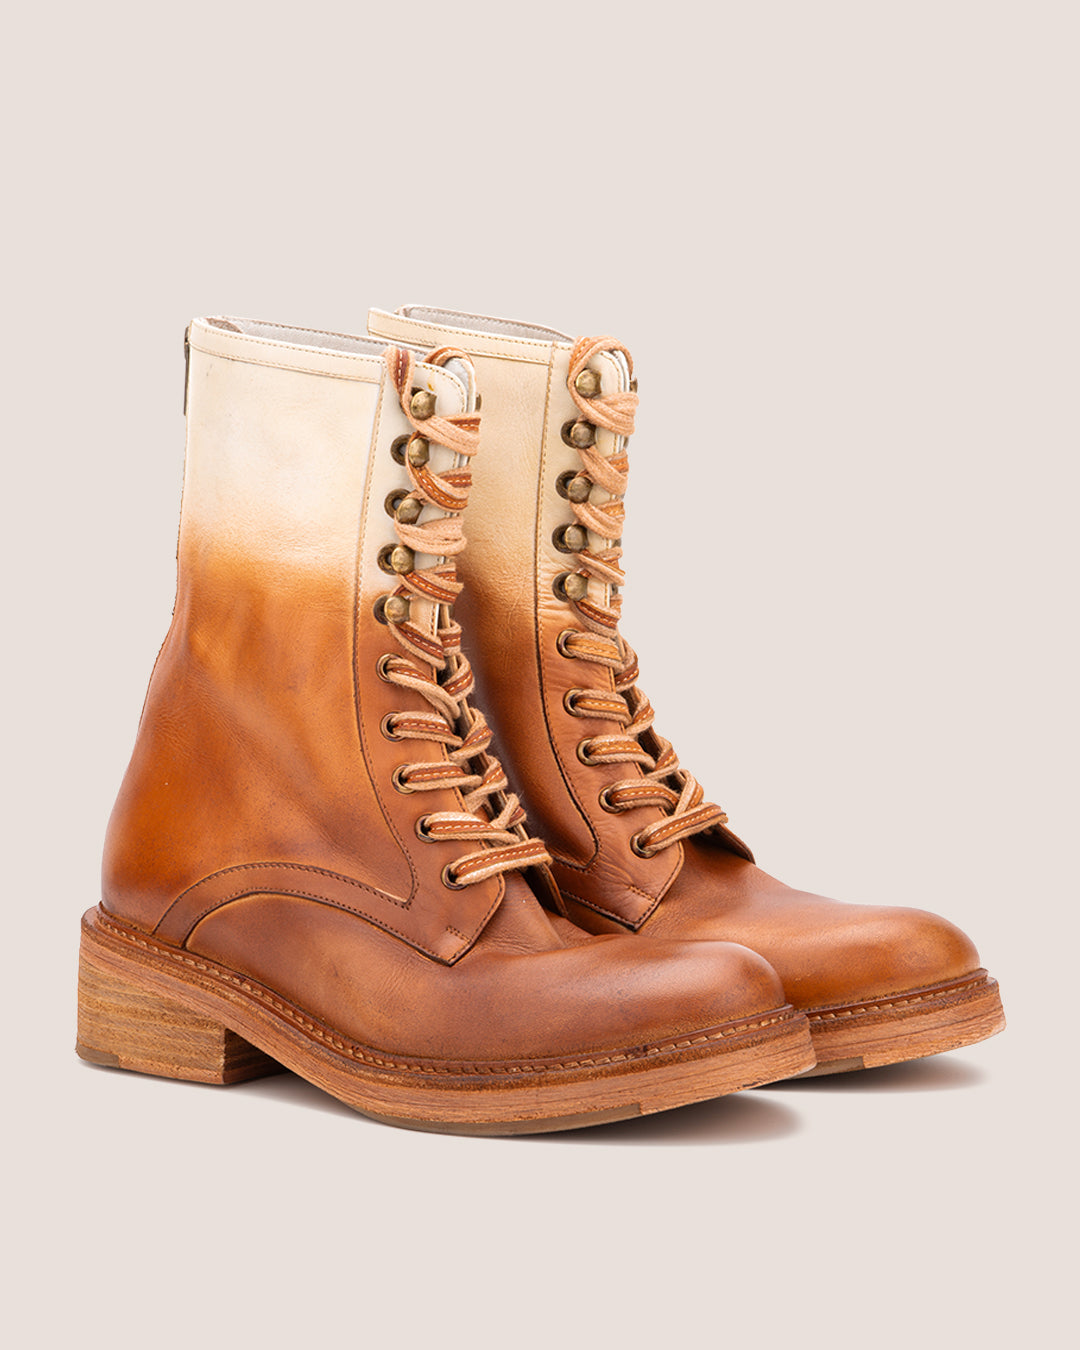 Free People, Santa Fe Lace-Up Boot